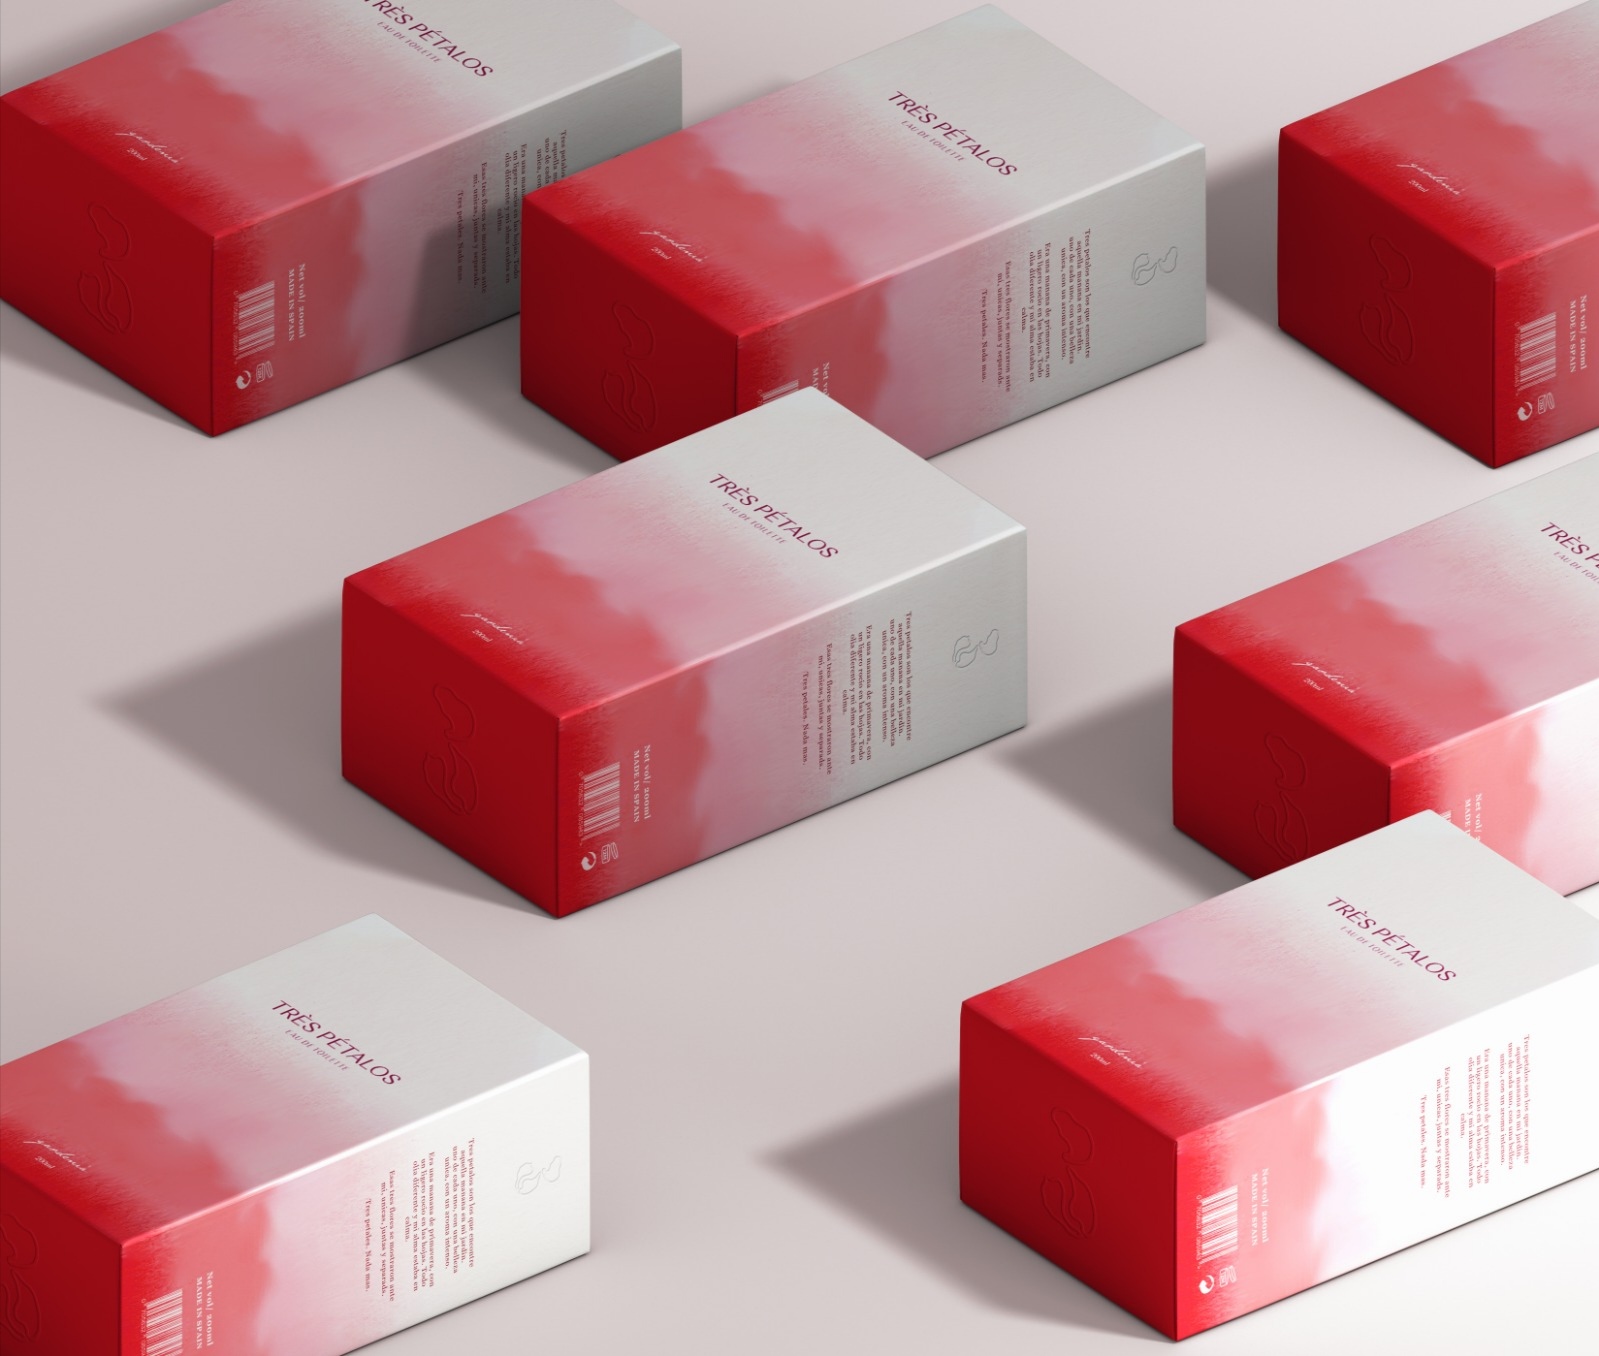 Concept Colour-Inspired Perfume Packaging by Ideas2Earth